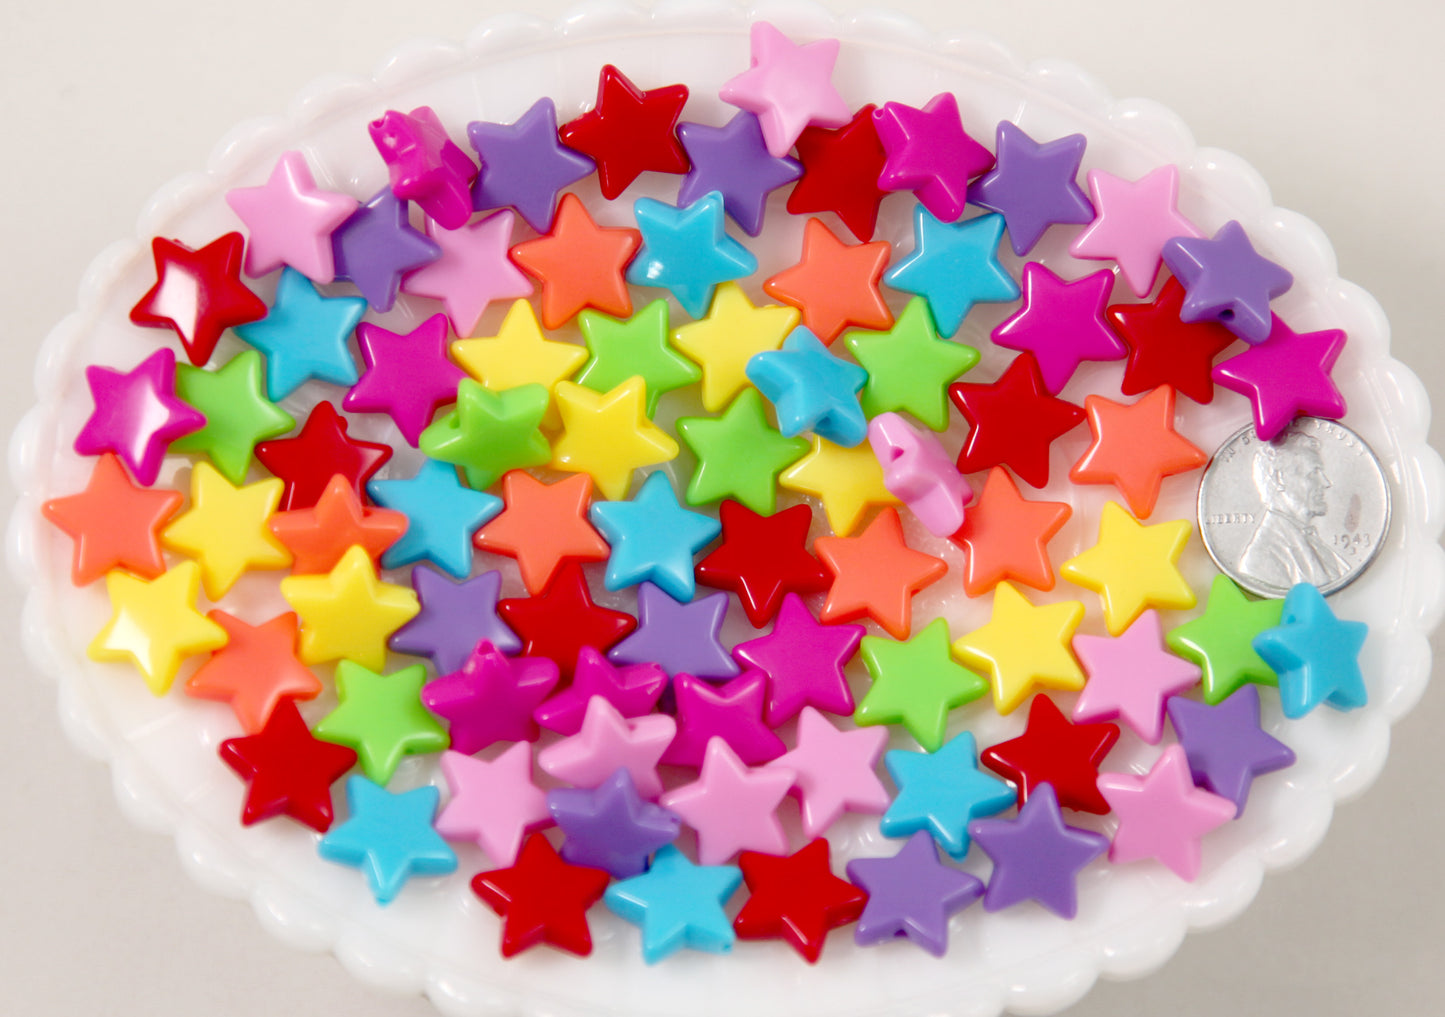 Plastic Star Beads - 14mm Small Flat Bright Color Plastic Stars Resin or Acrylic Beads - 80 pc set